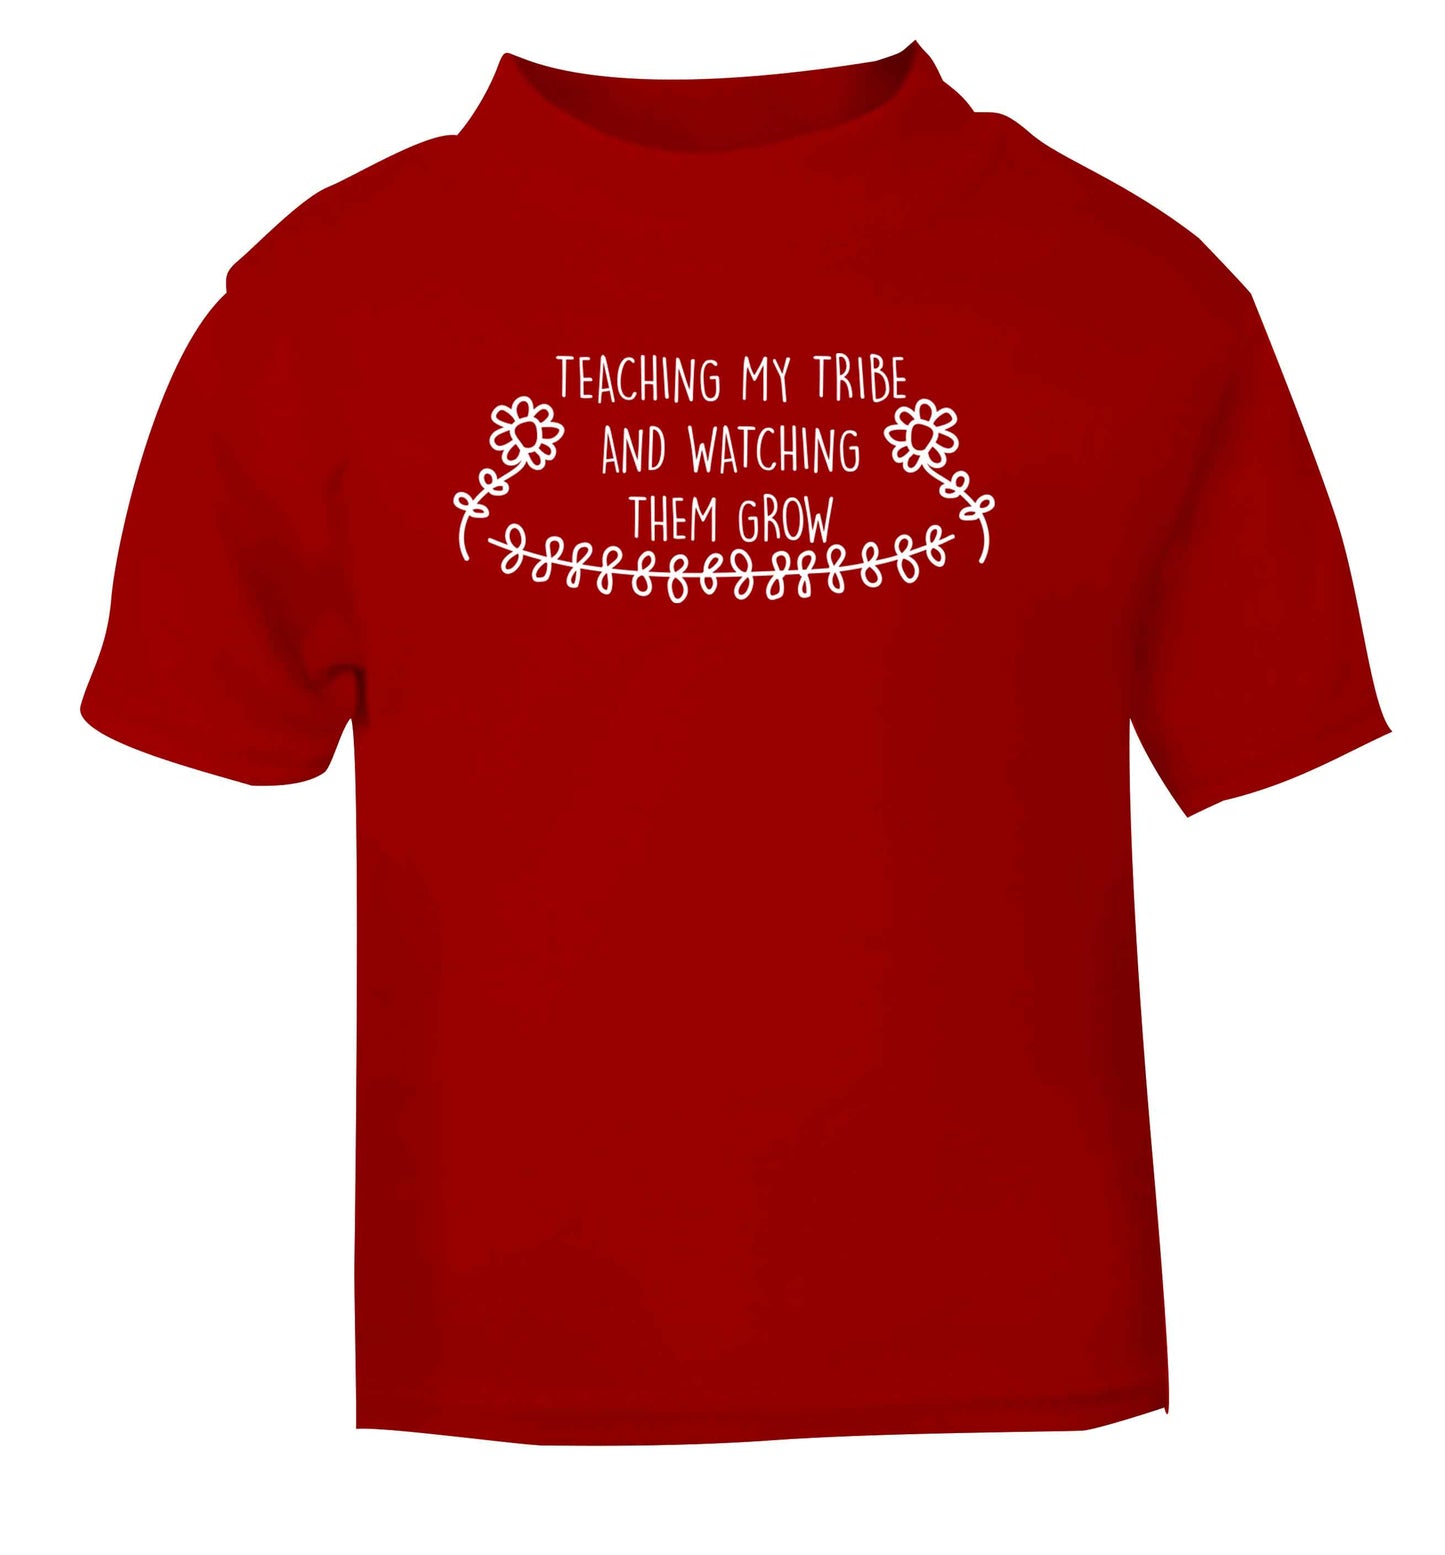 Teaching my tribe and watching them grow red Baby Toddler Tshirt 2 Years